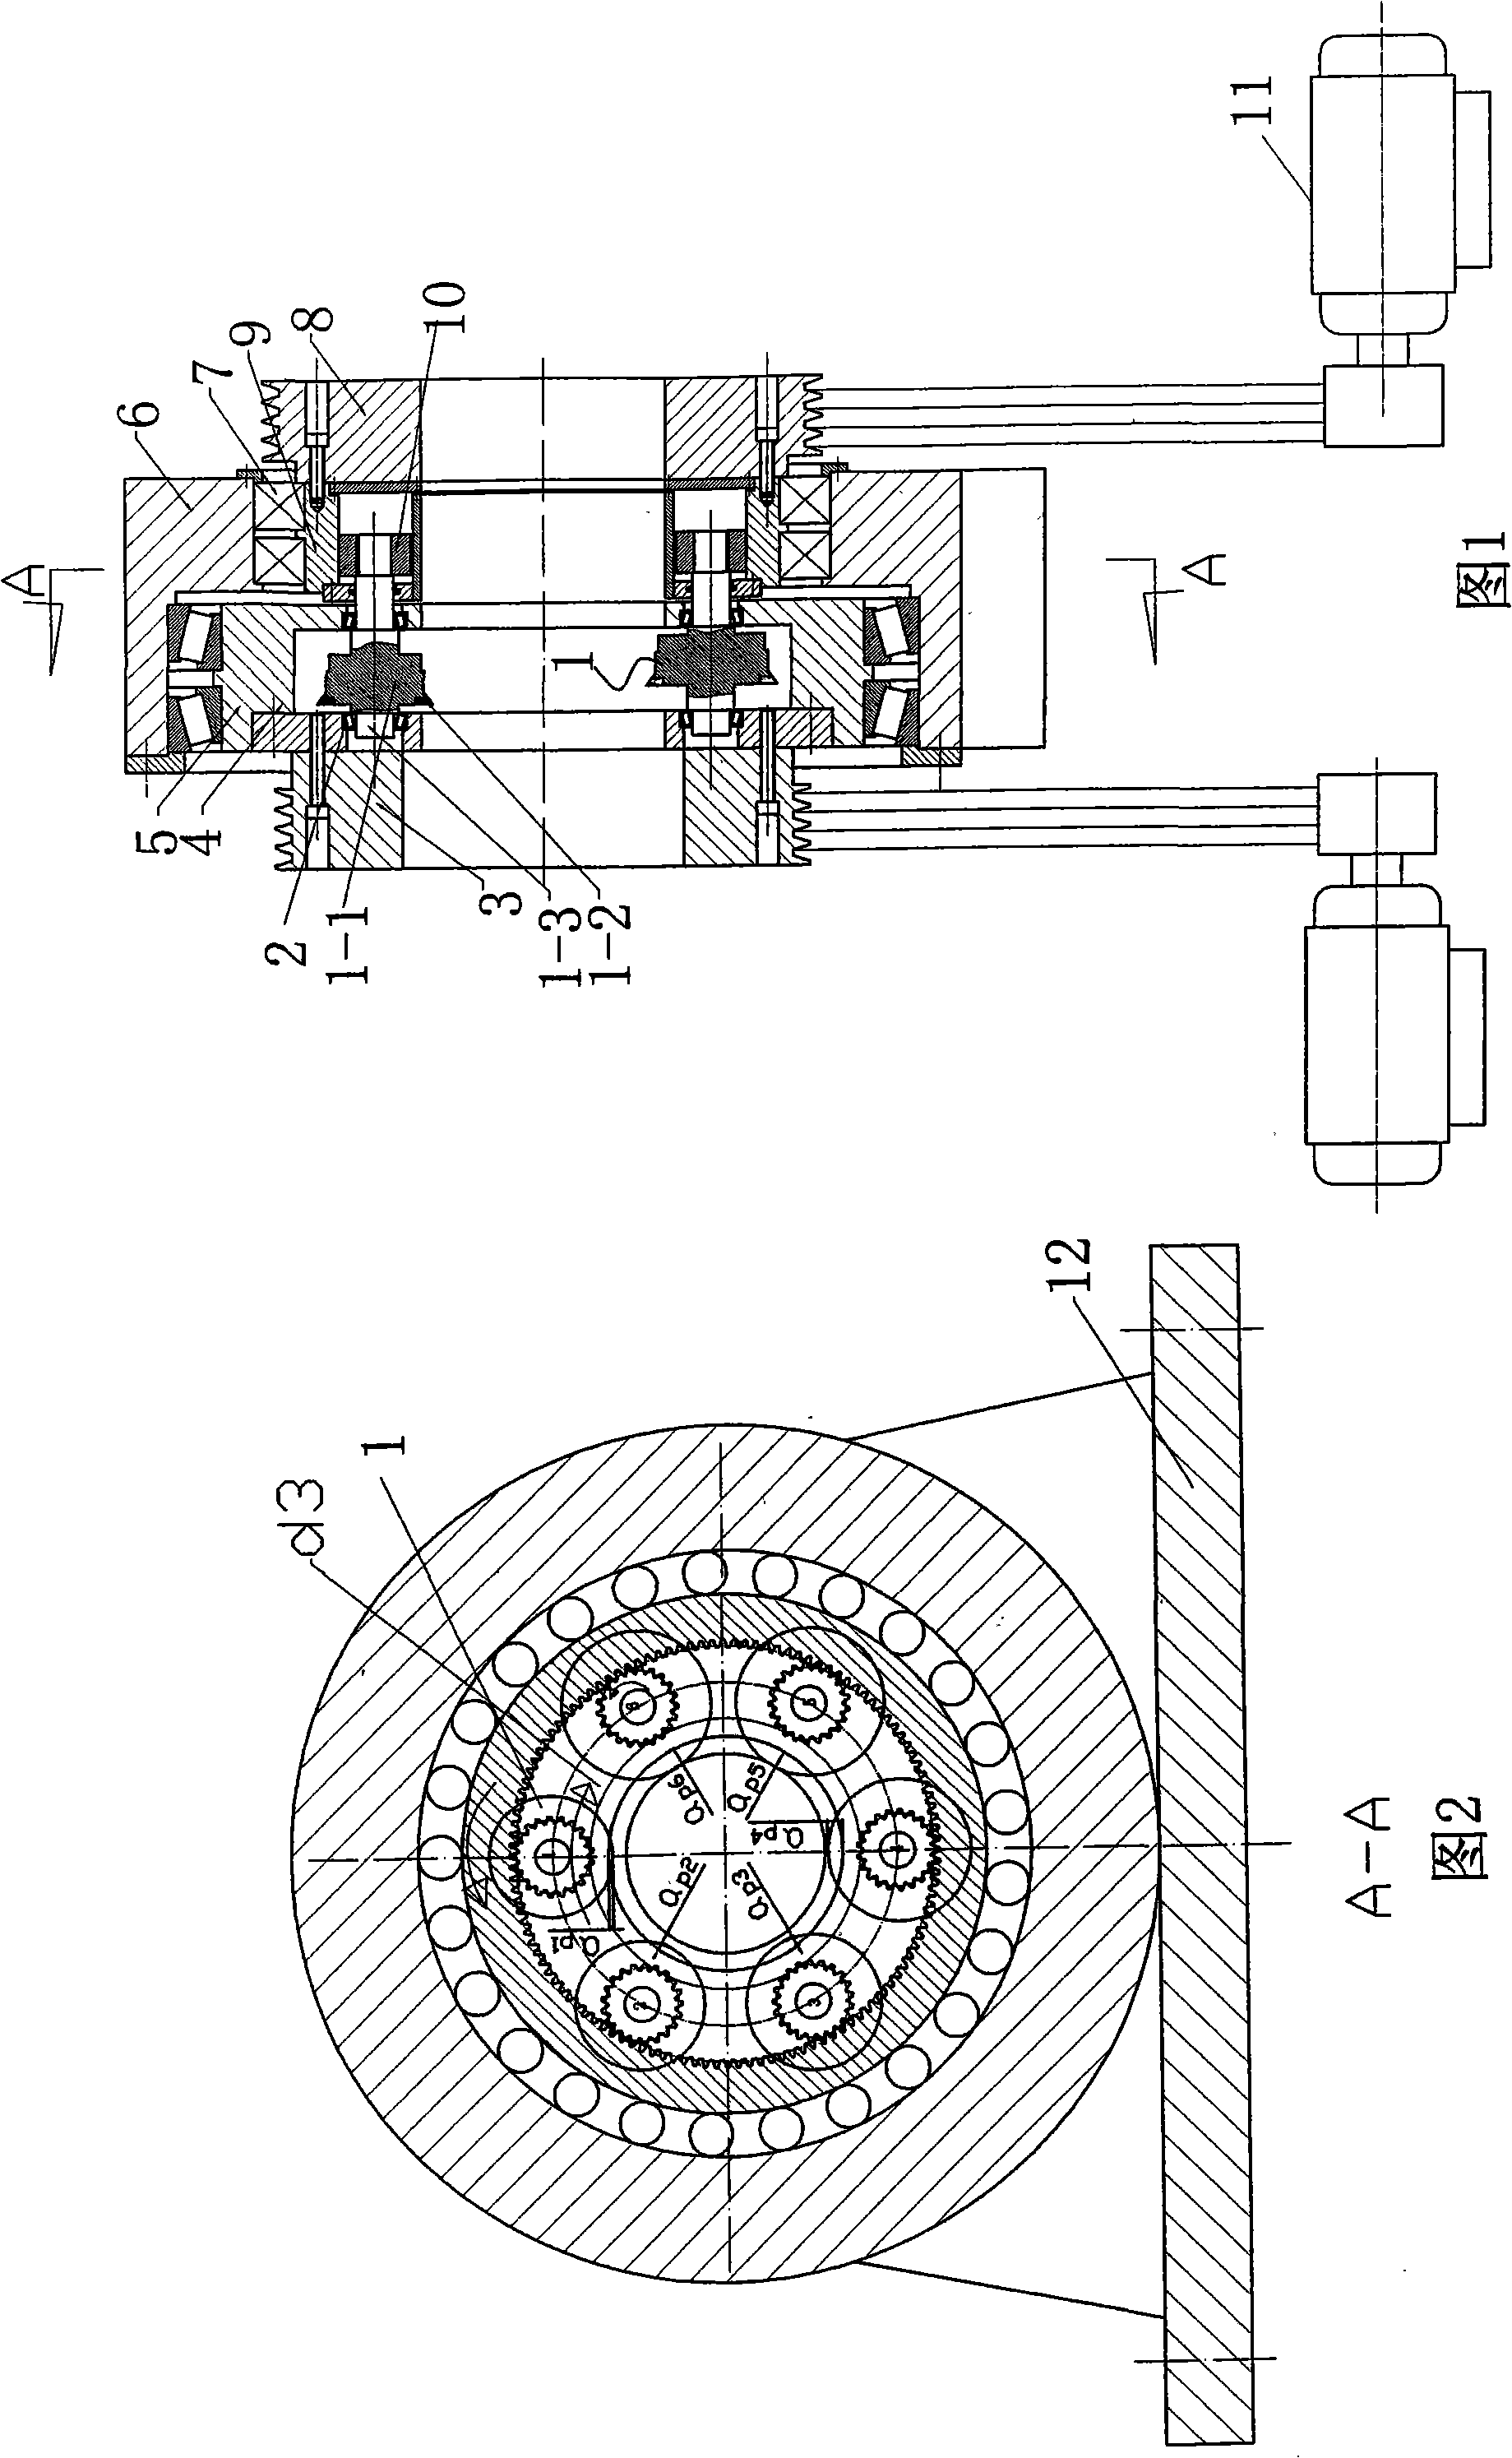 Multi-cutter complex cyclone milling processing method and special topping mechanism thereof